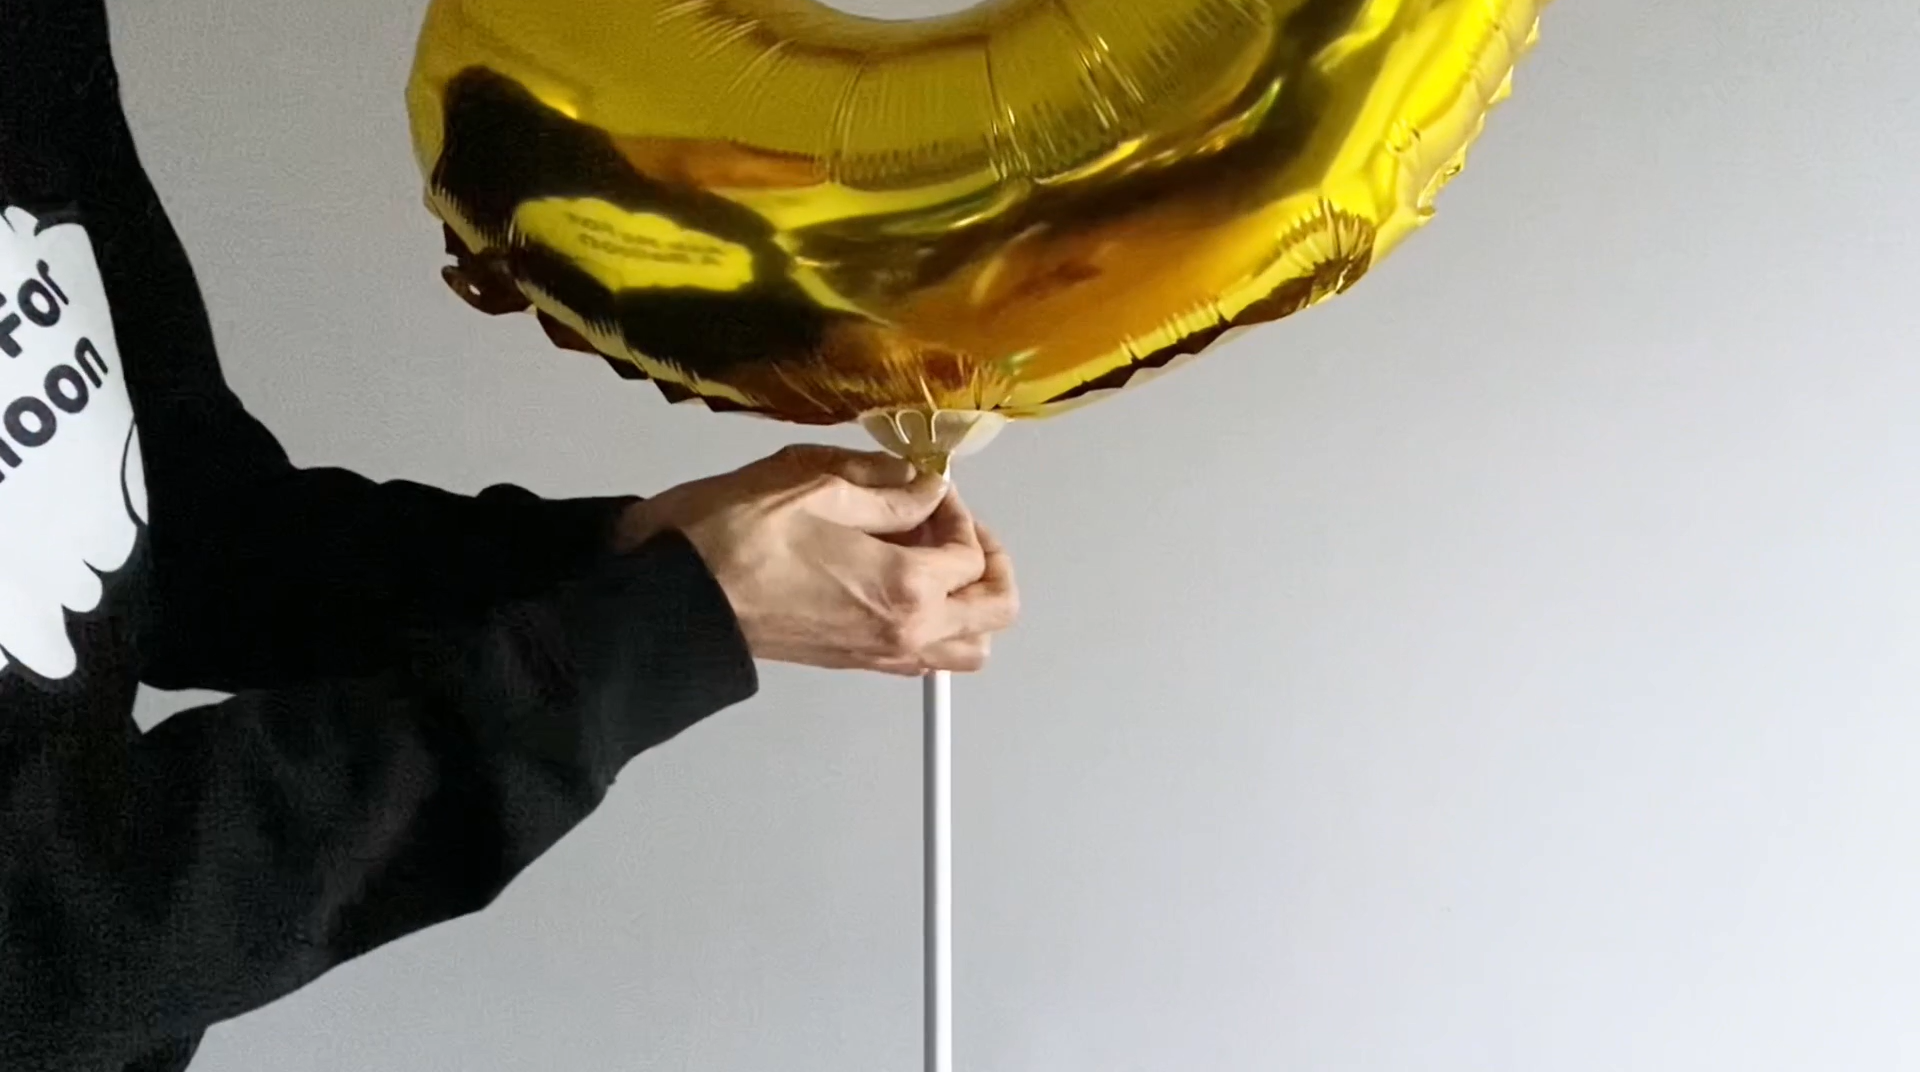 Attaching the number balloon to the column stand